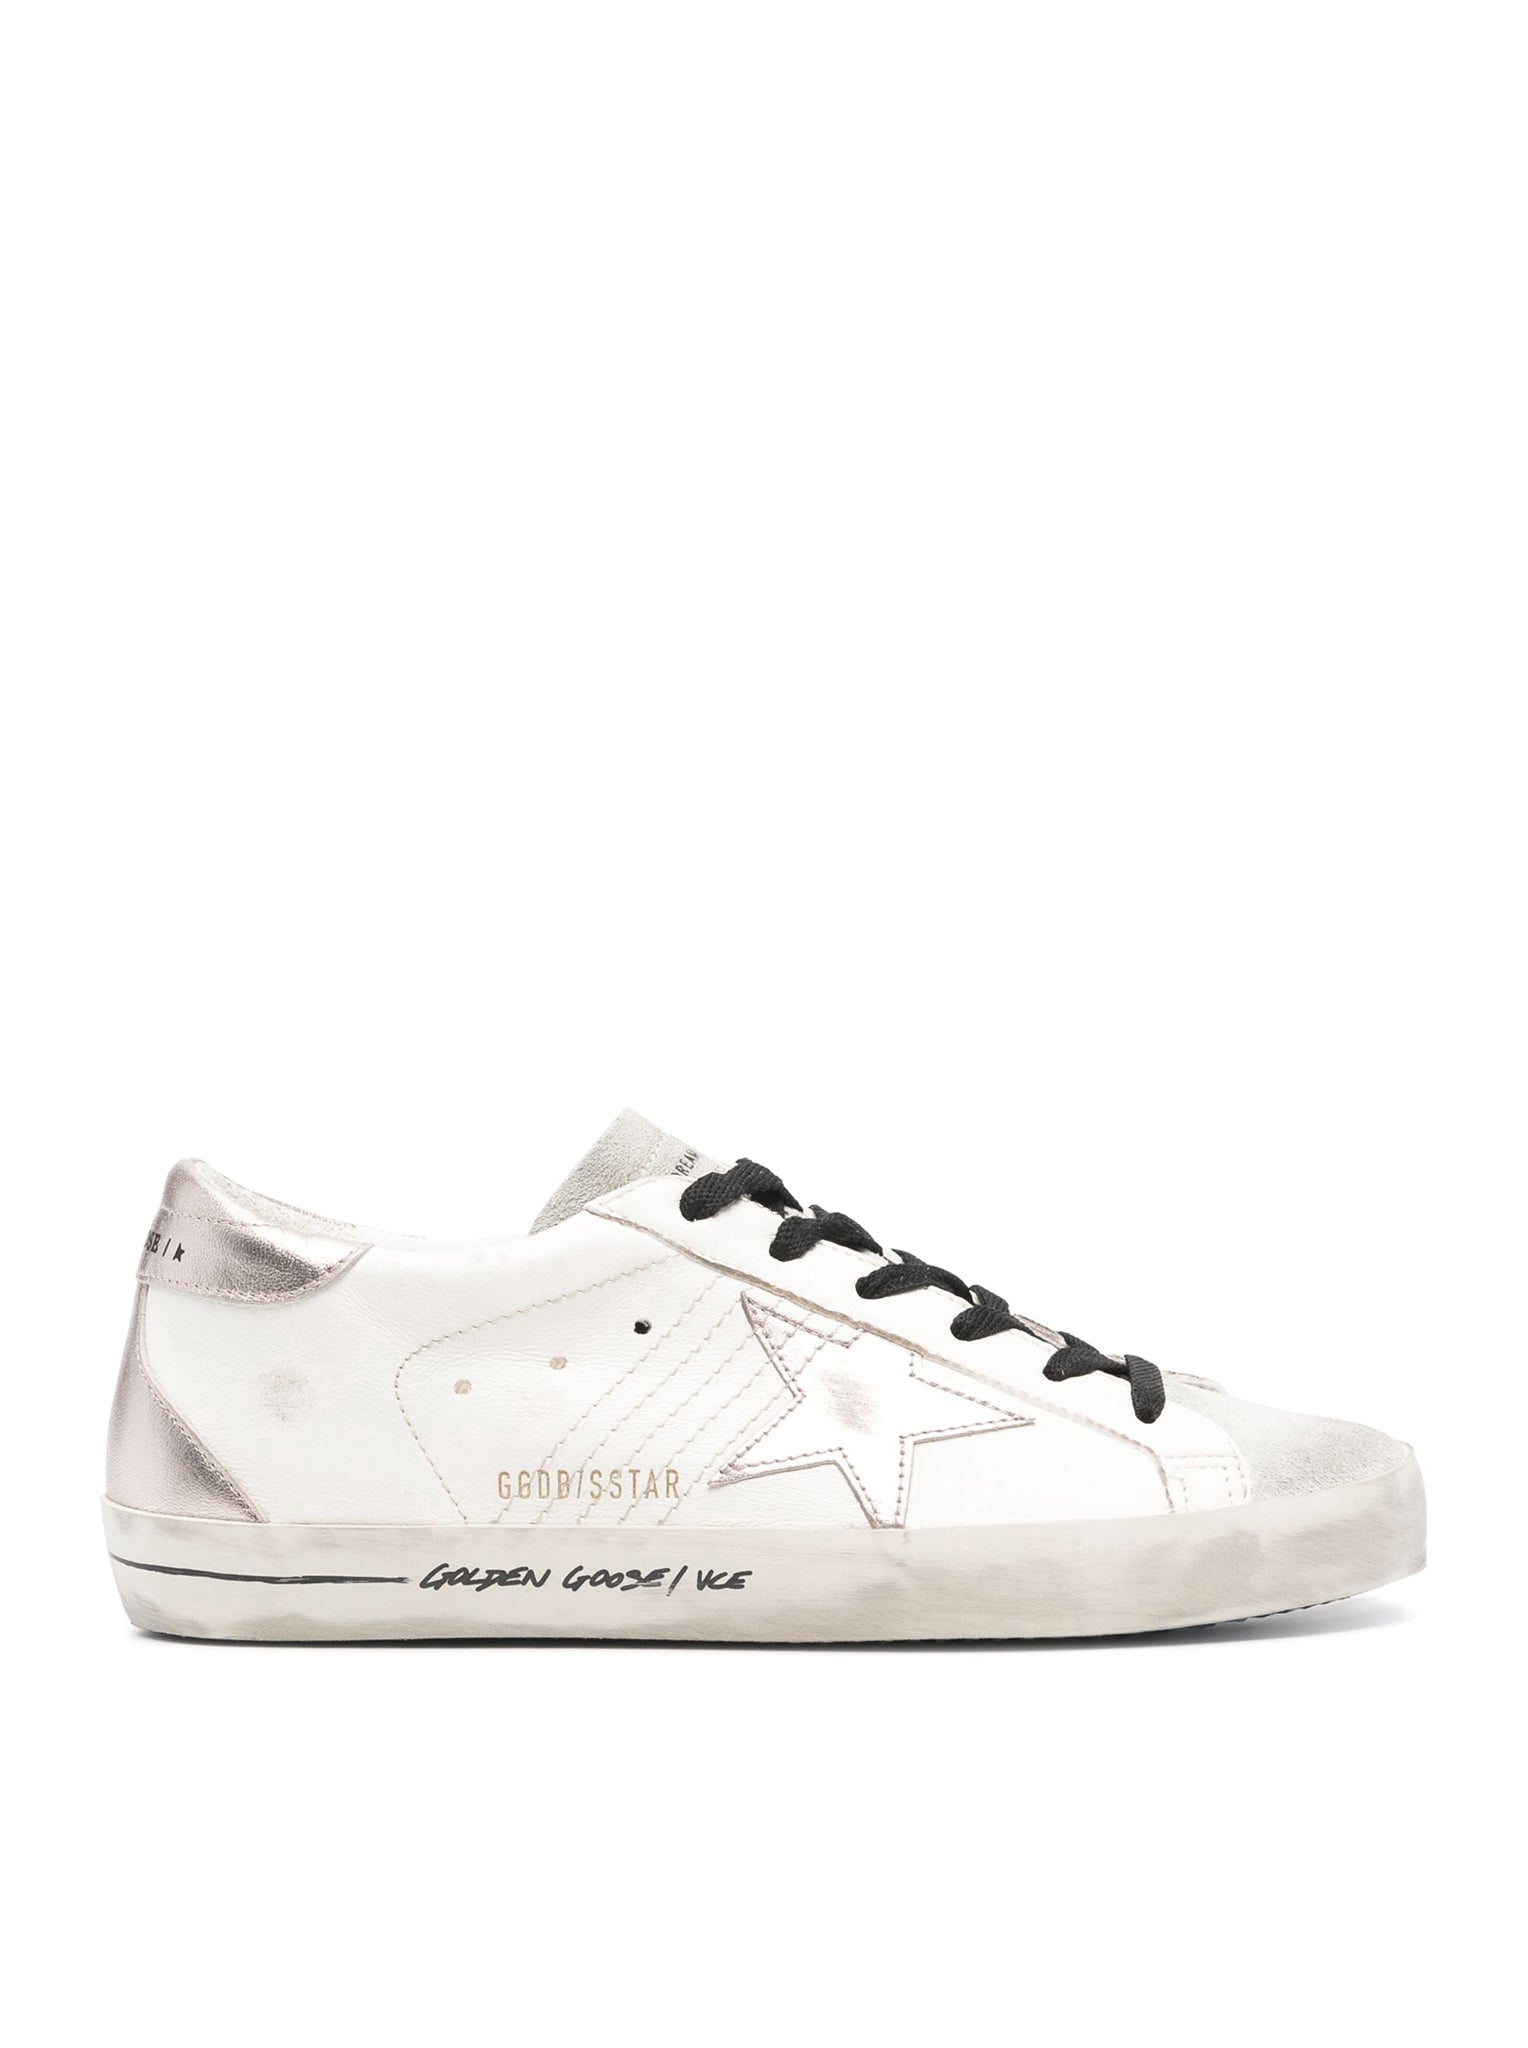 SuperStar leather sneakers